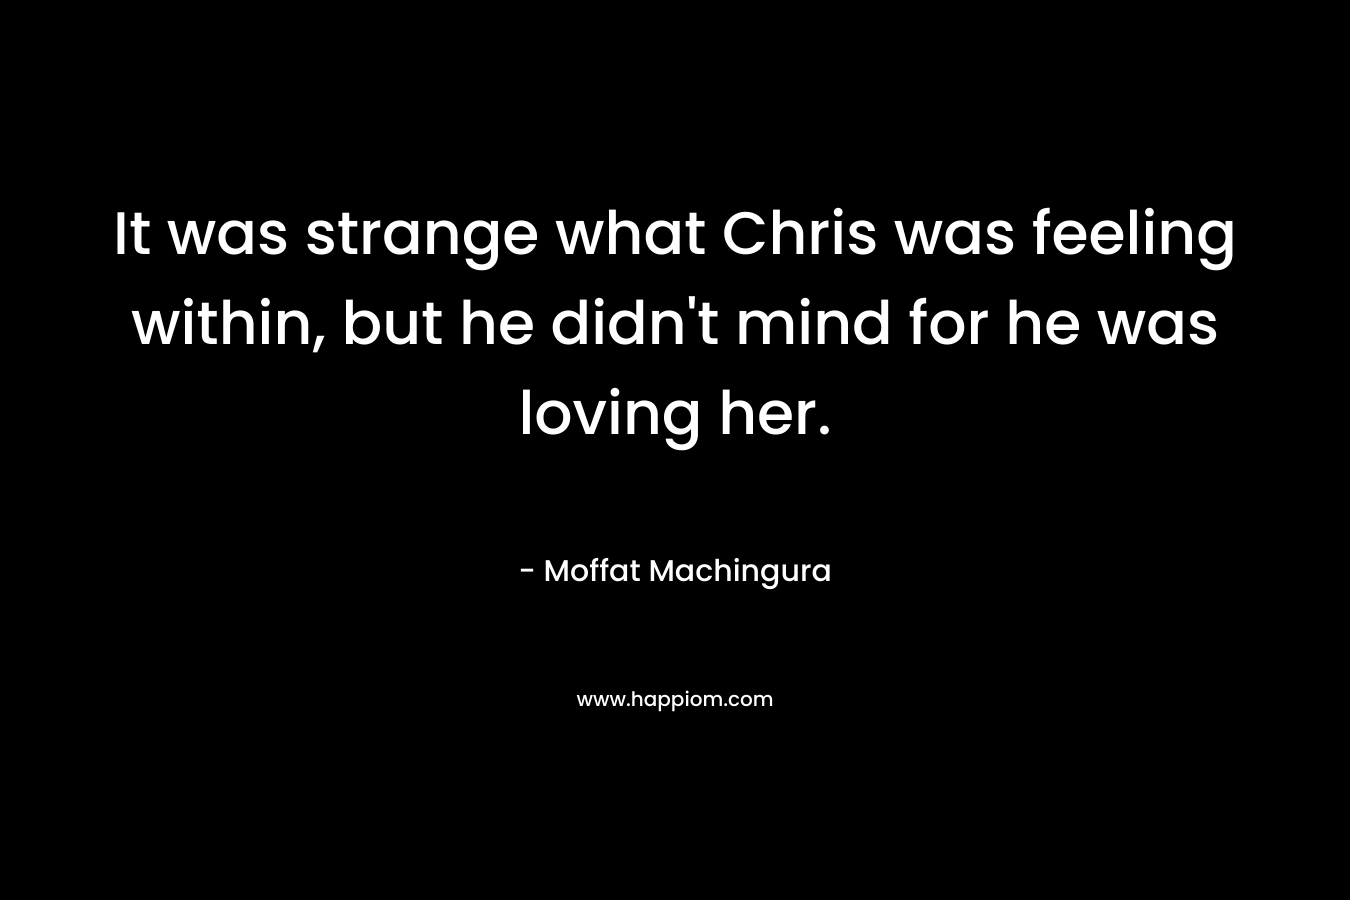 It was strange what Chris was feeling within, but he didn't mind for he was loving her.